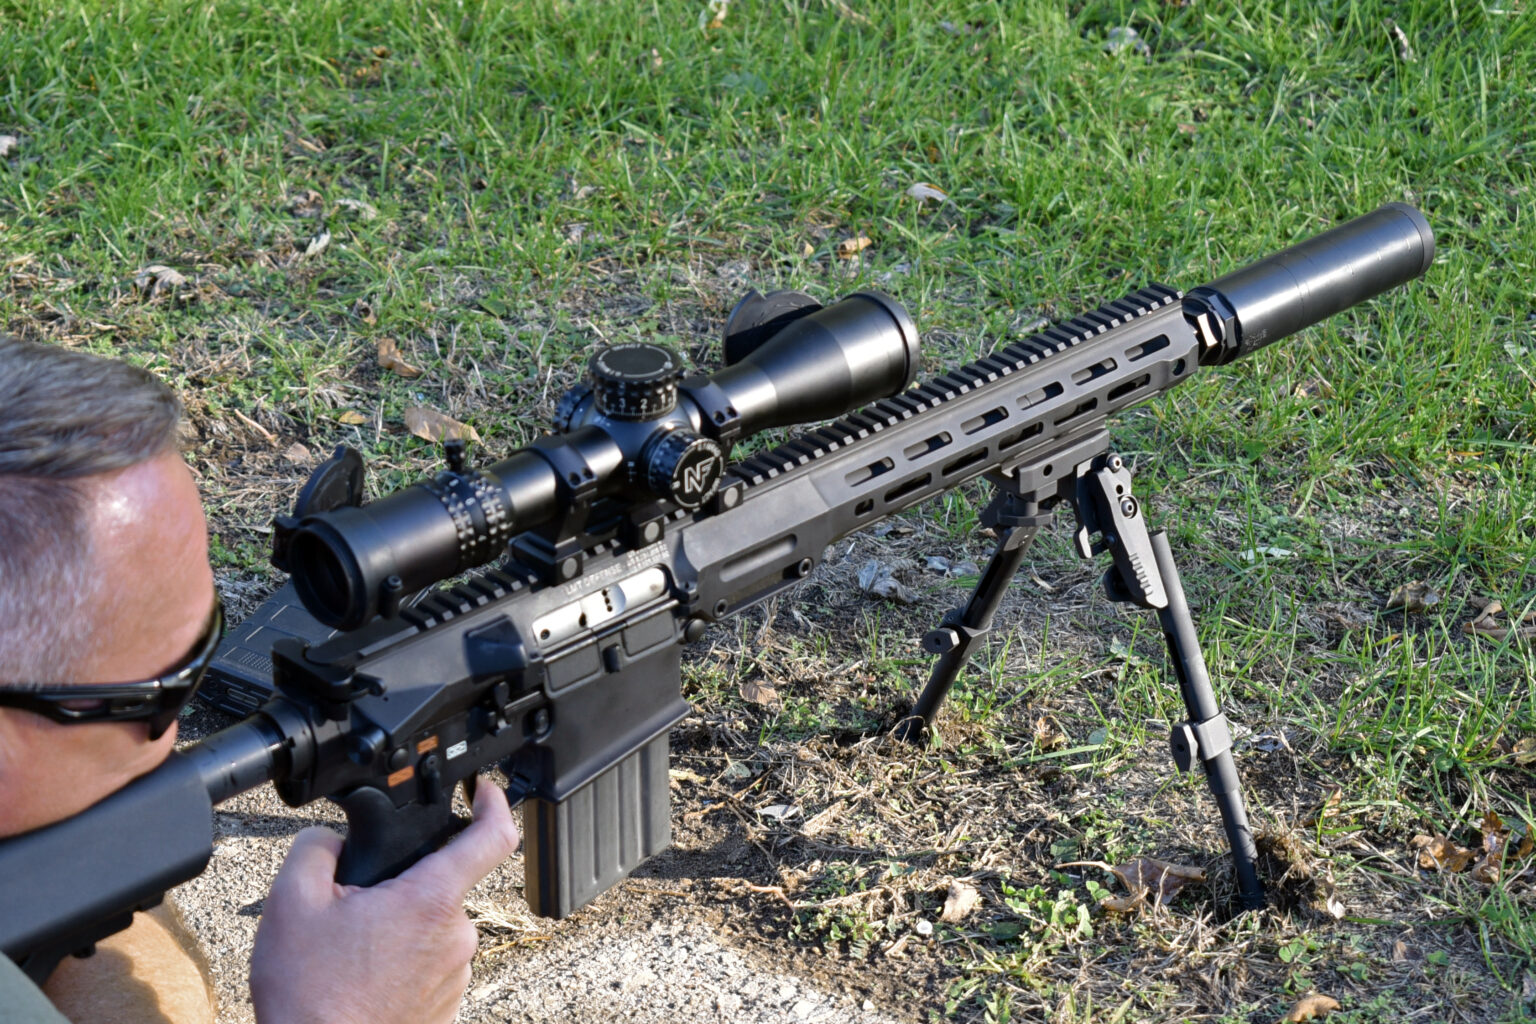 Over-the-should view of a white man in sunglasses lying on the ground, aiming a high-powered automatic rifle the suppressor attached.